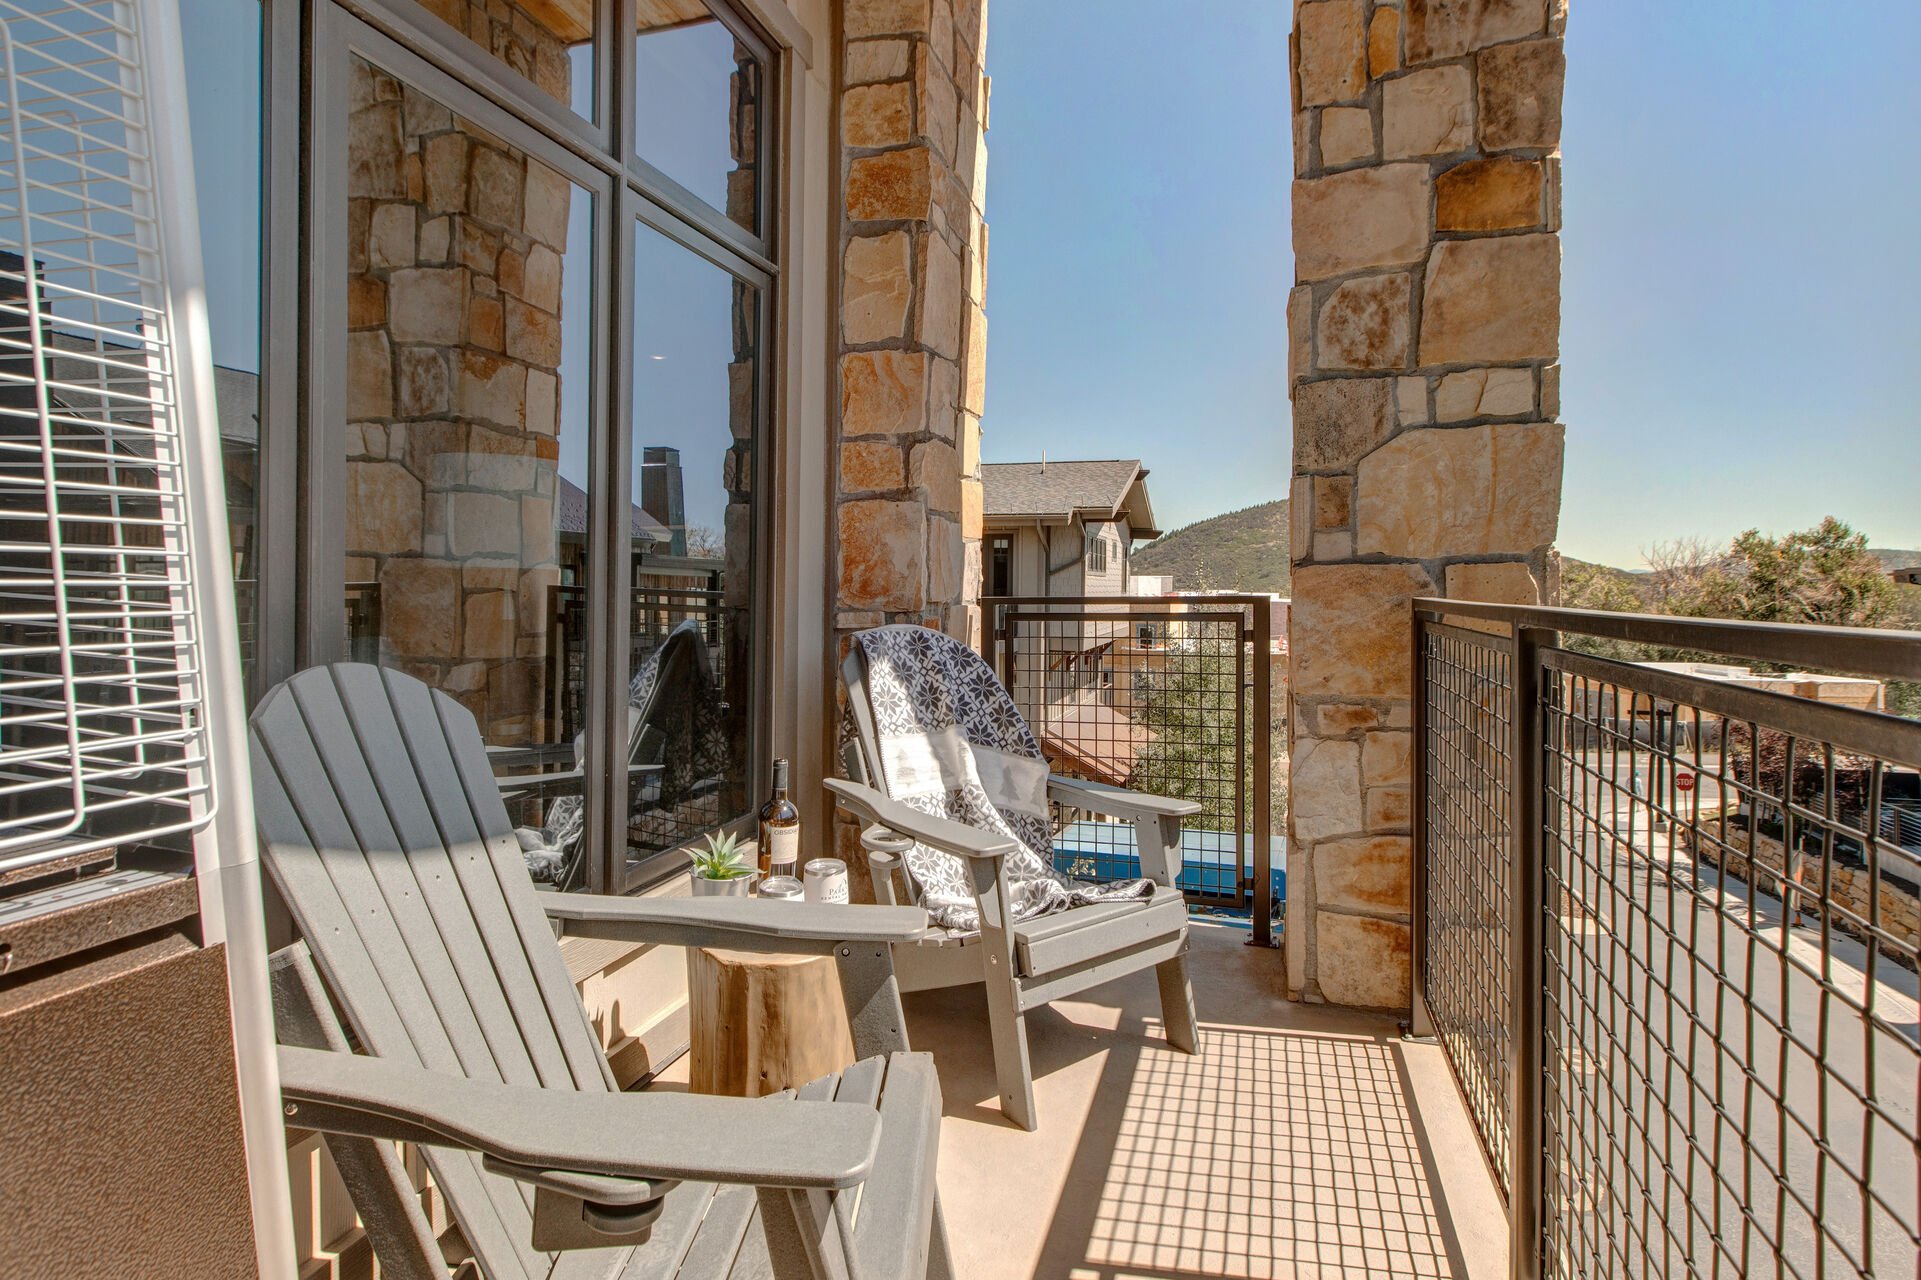 Private deck with BBQ grill, outdoor seating and beautiful views